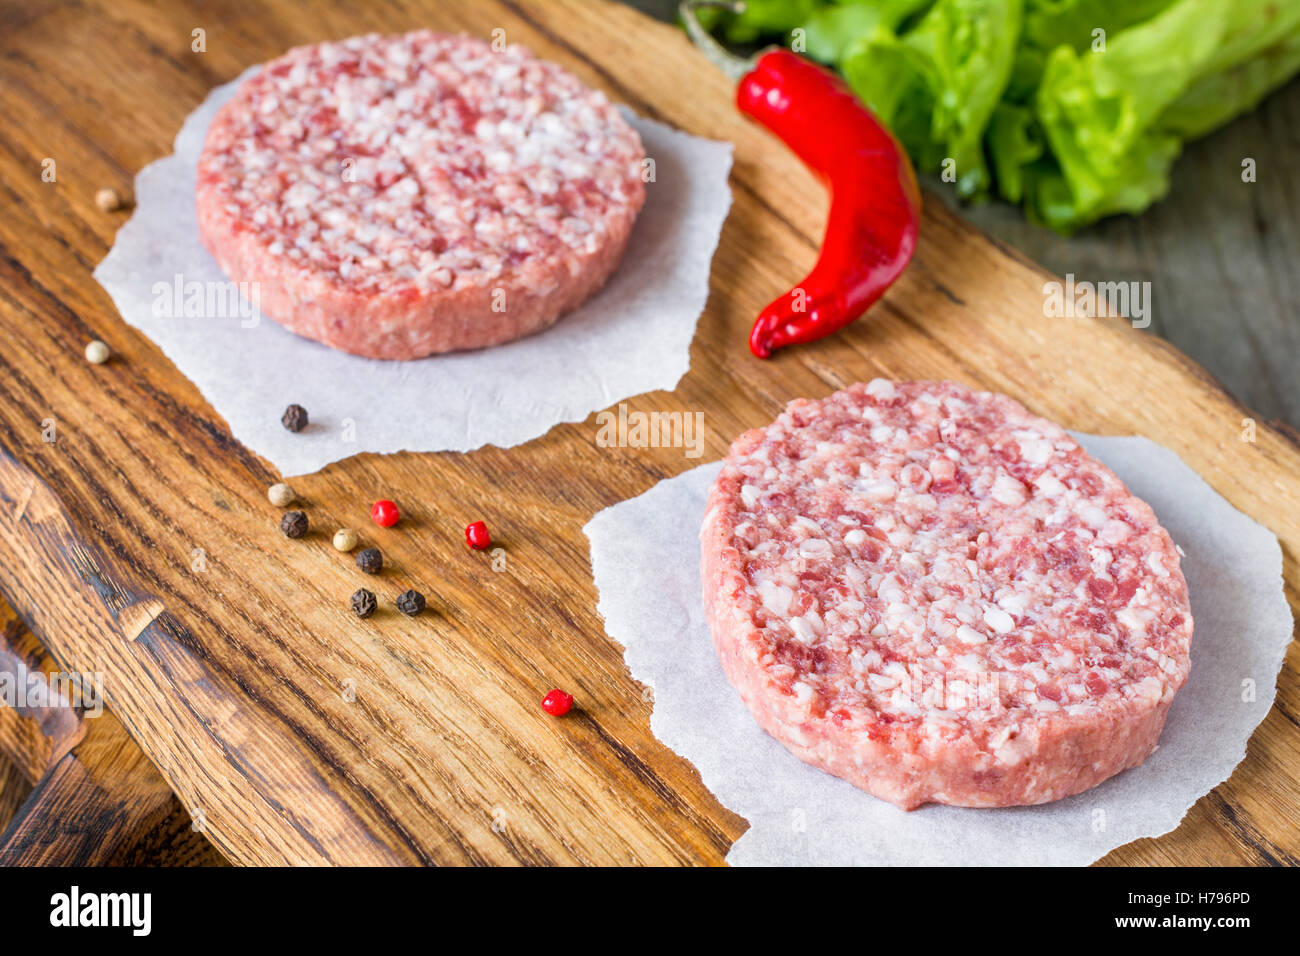 Raw fresh burger meat patties on wooden chopping board Stock Photo